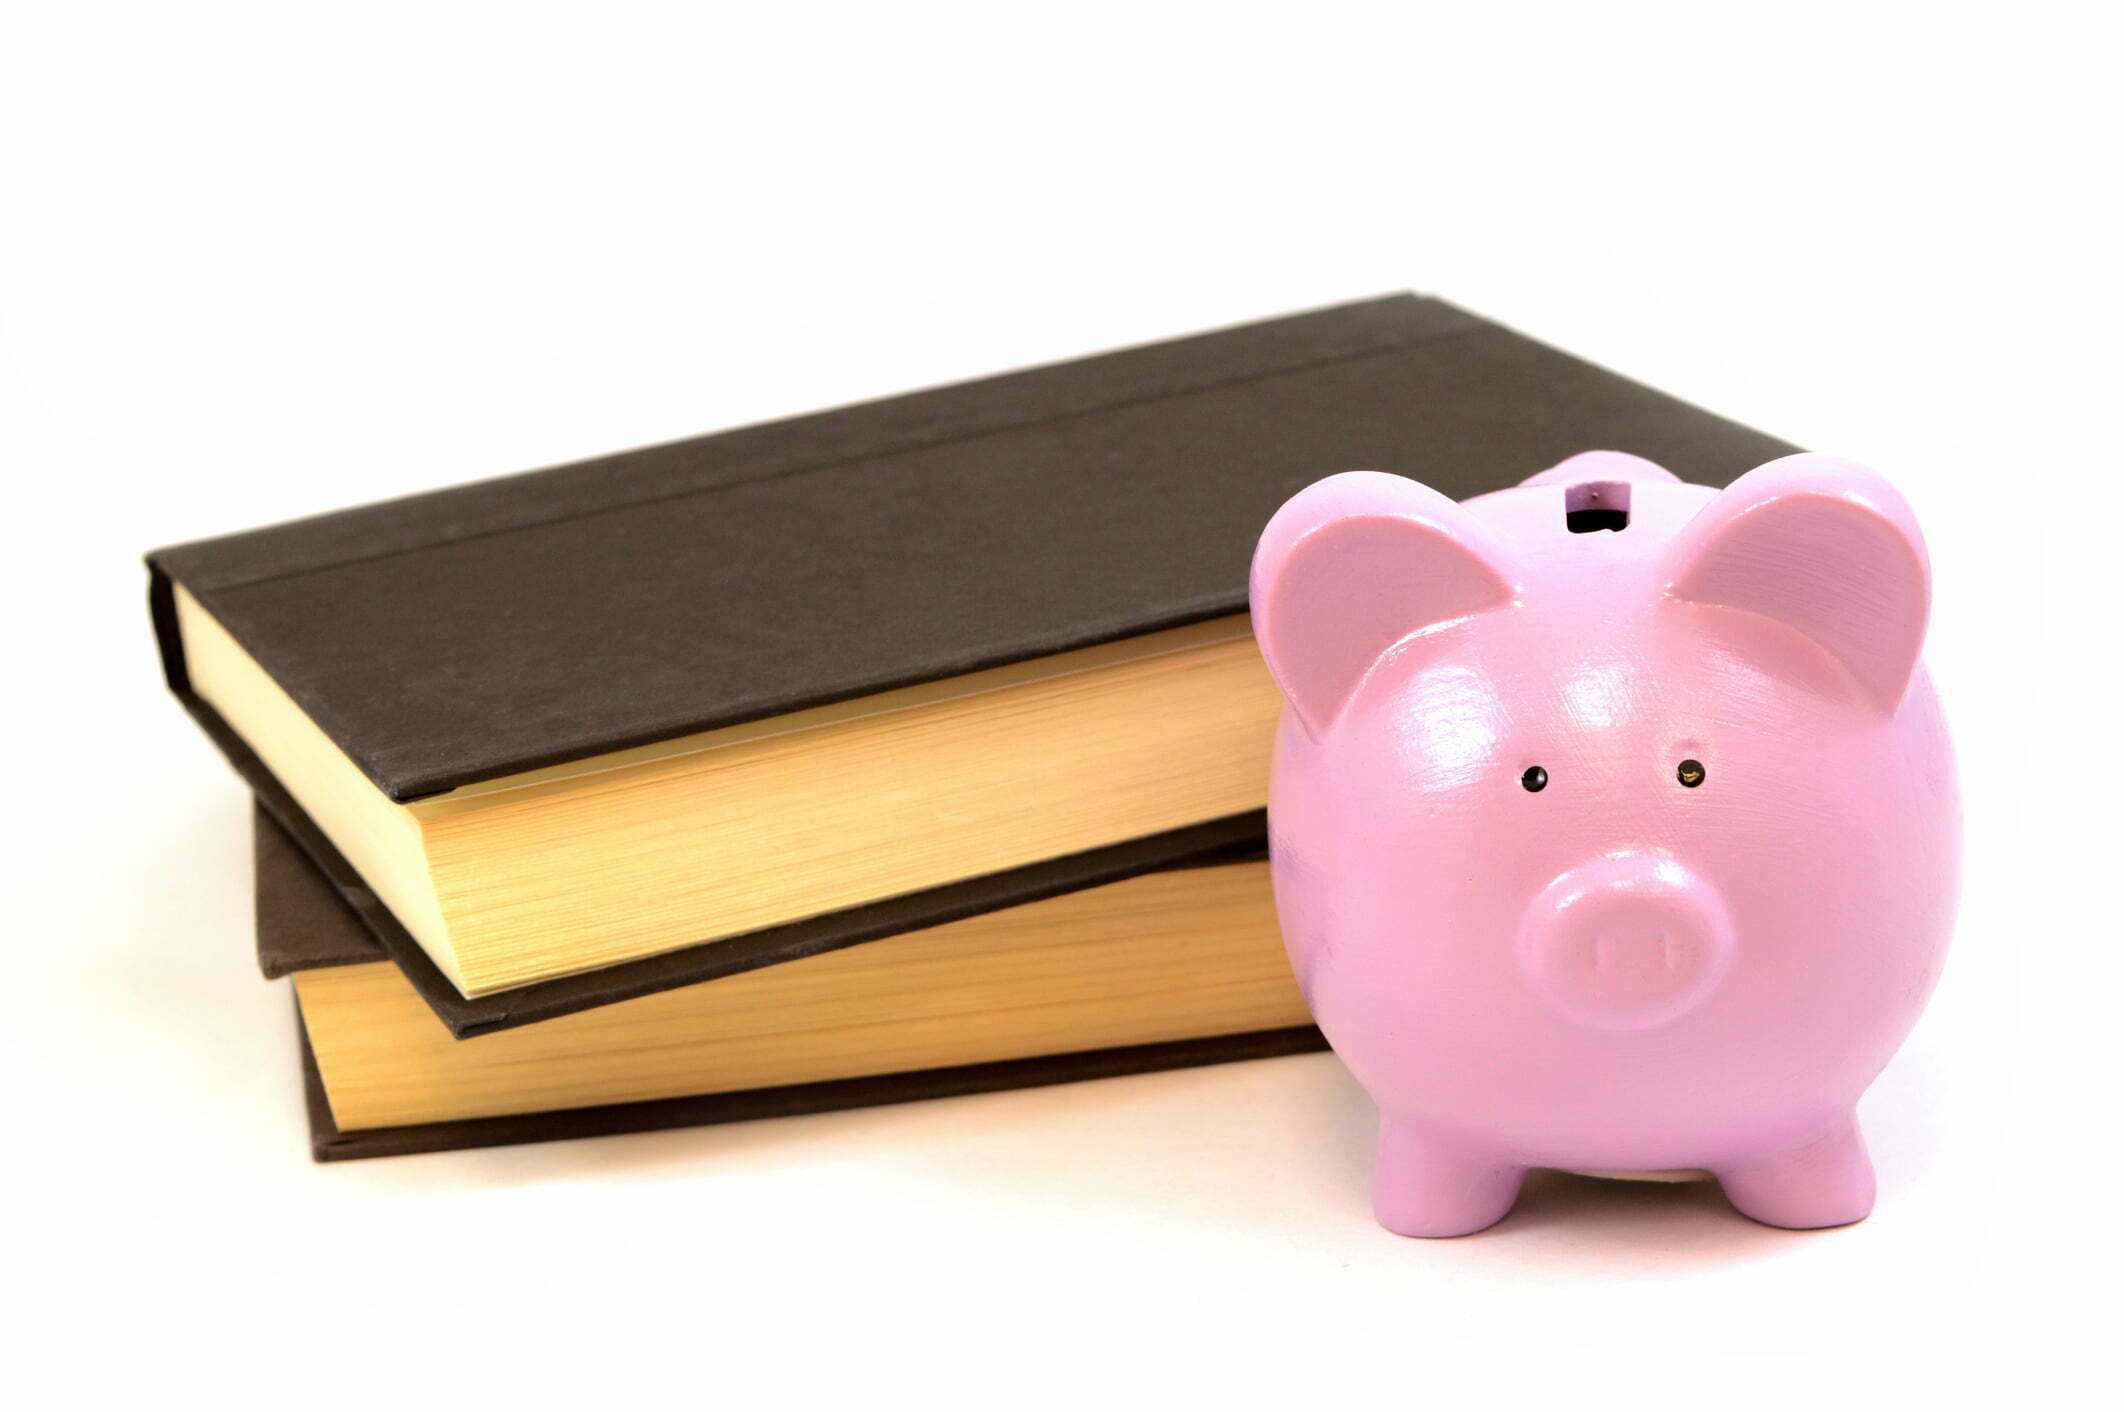 A set of books and a piggy bank to educate the reader on money and wealth.